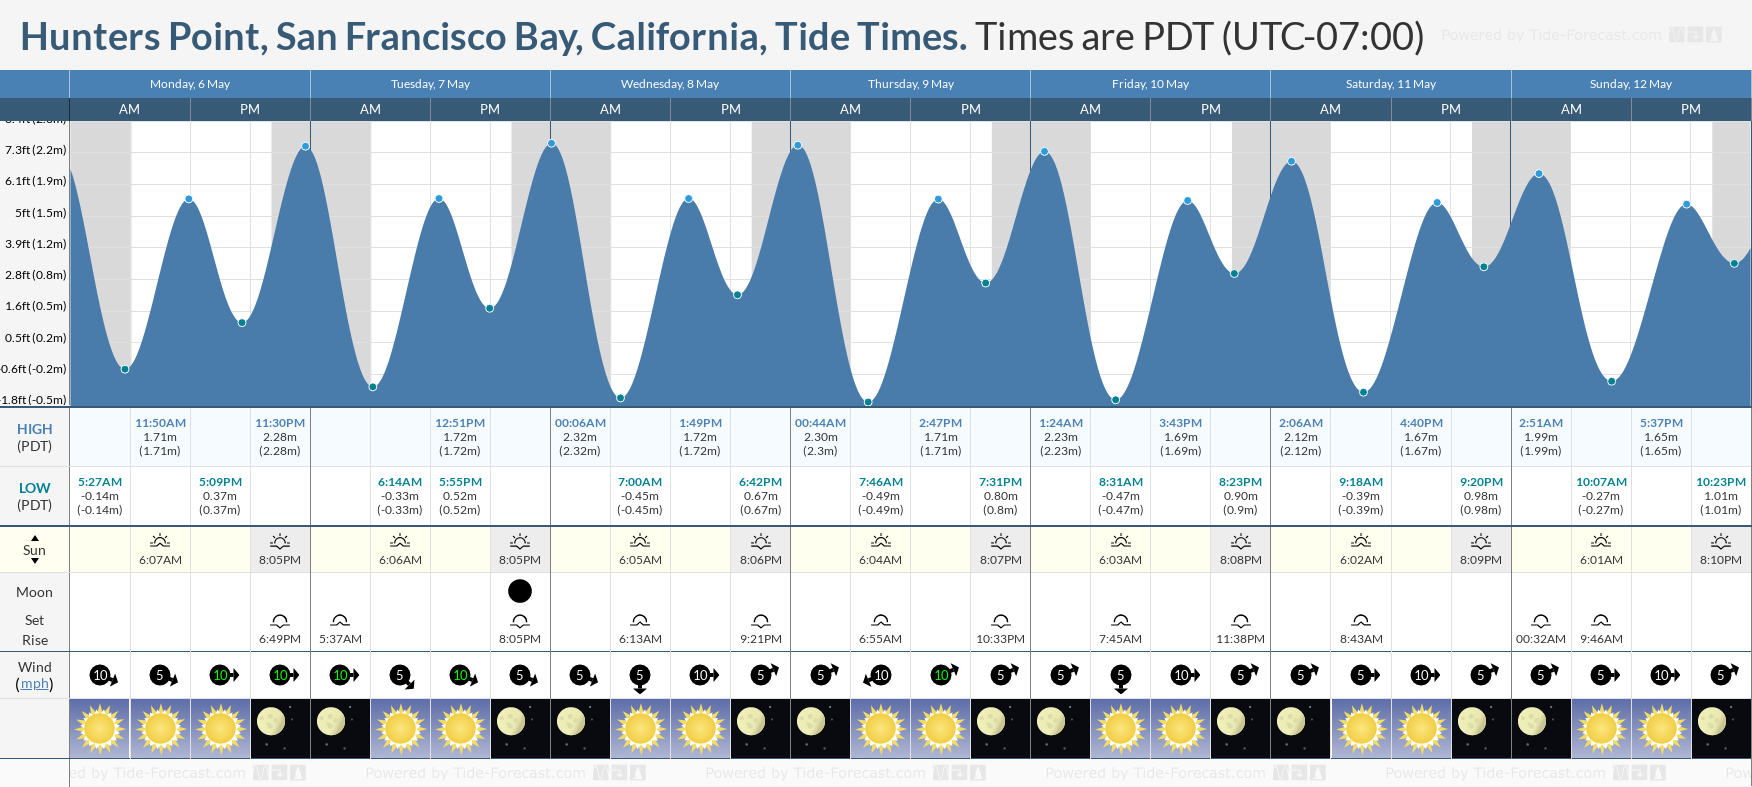 Hunters Point, San Francisco Bay, California Tide Chart including high and low tide times for the next 7 days